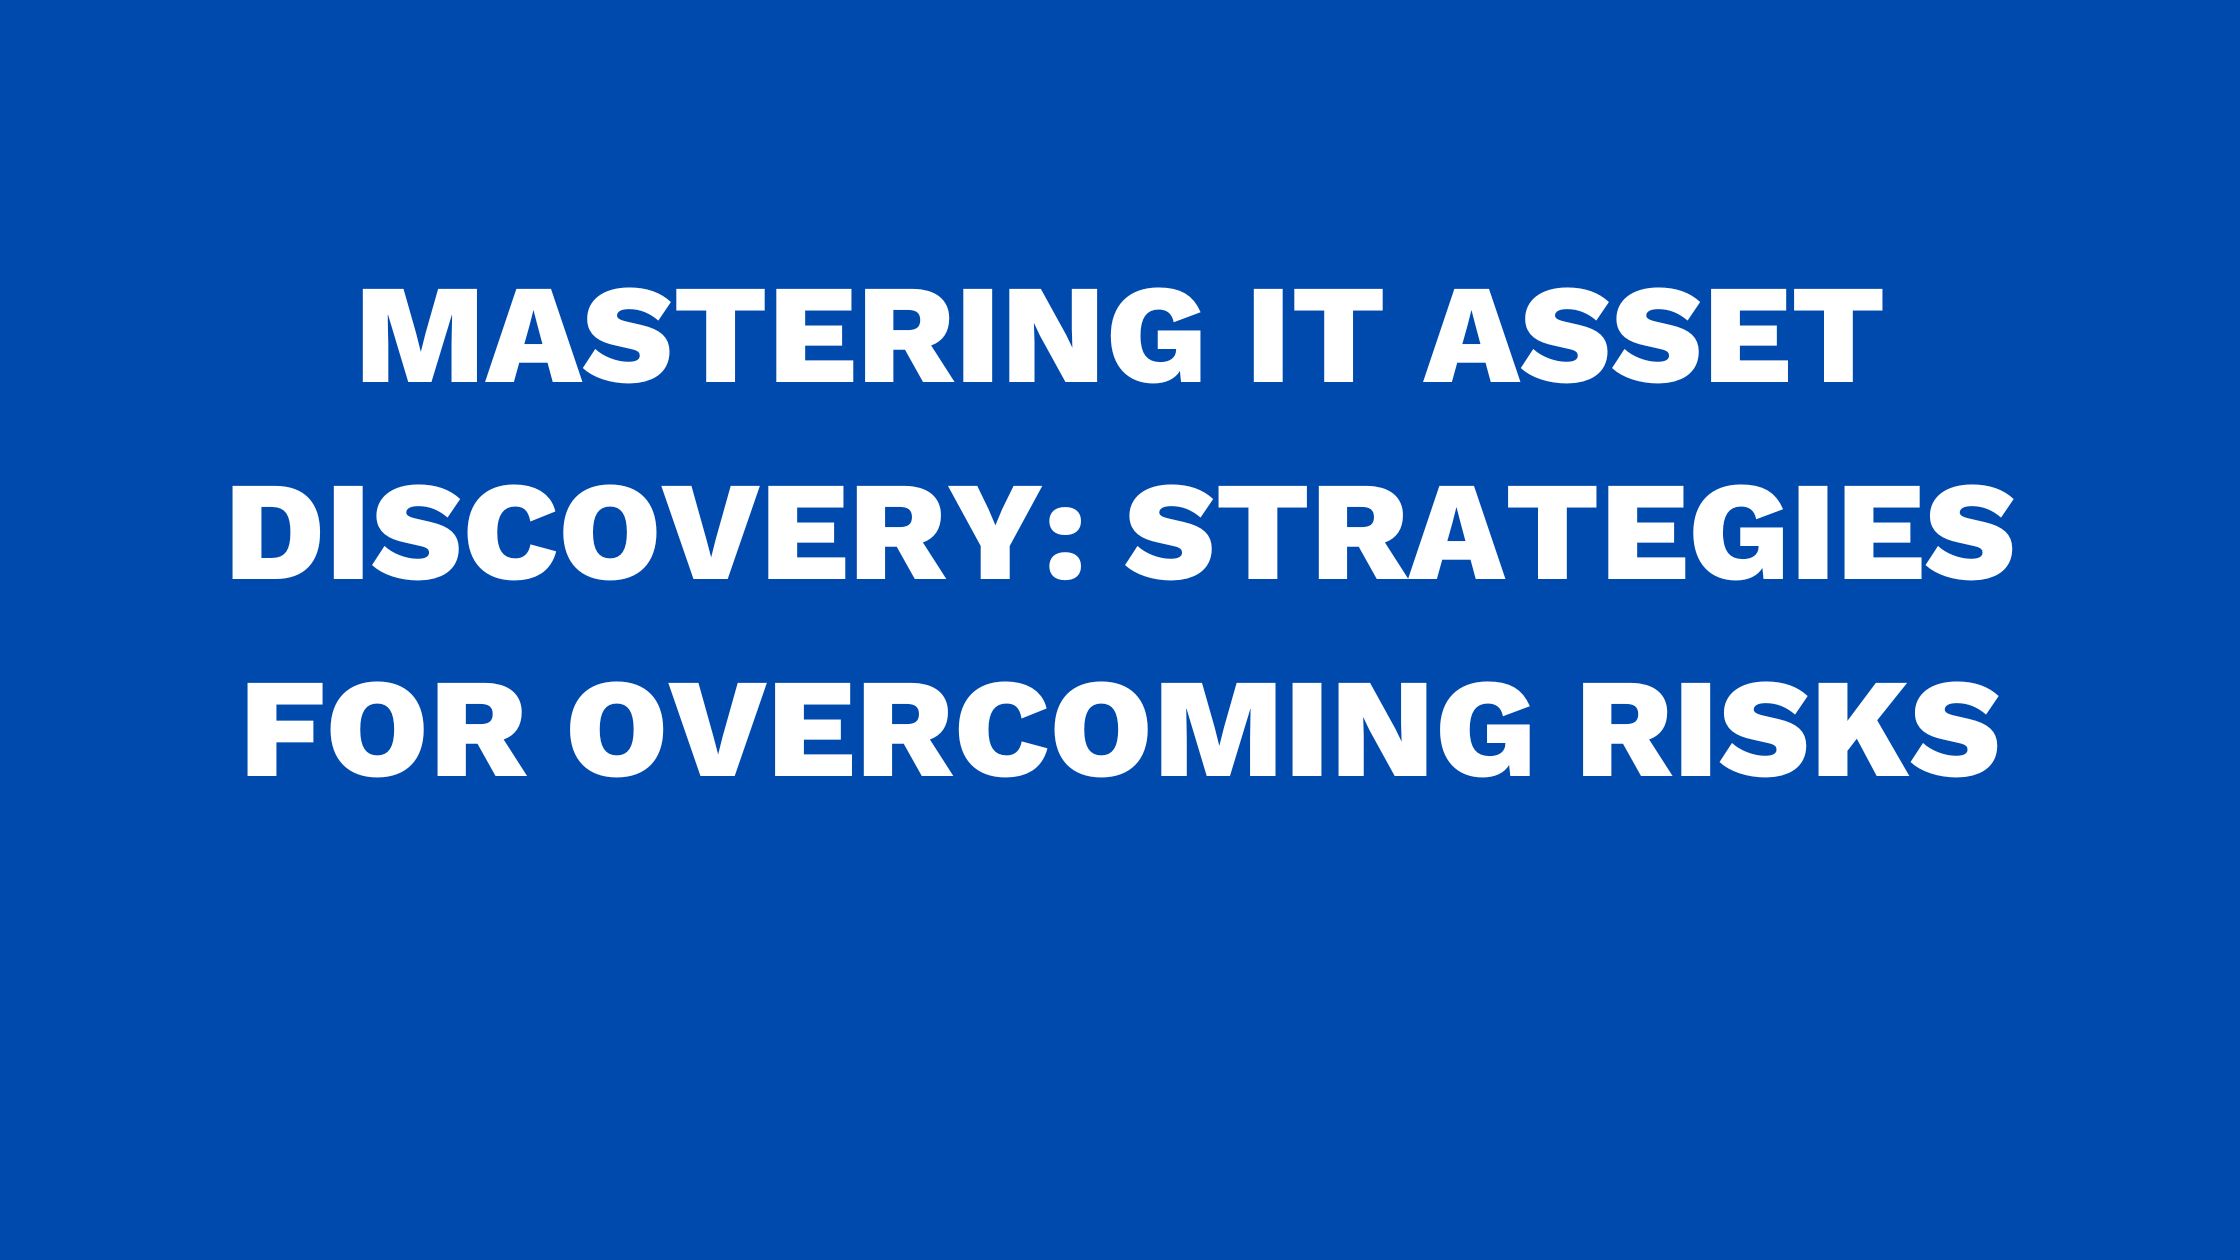 Mastering IT asset discovery: Strategies for overcoming risks